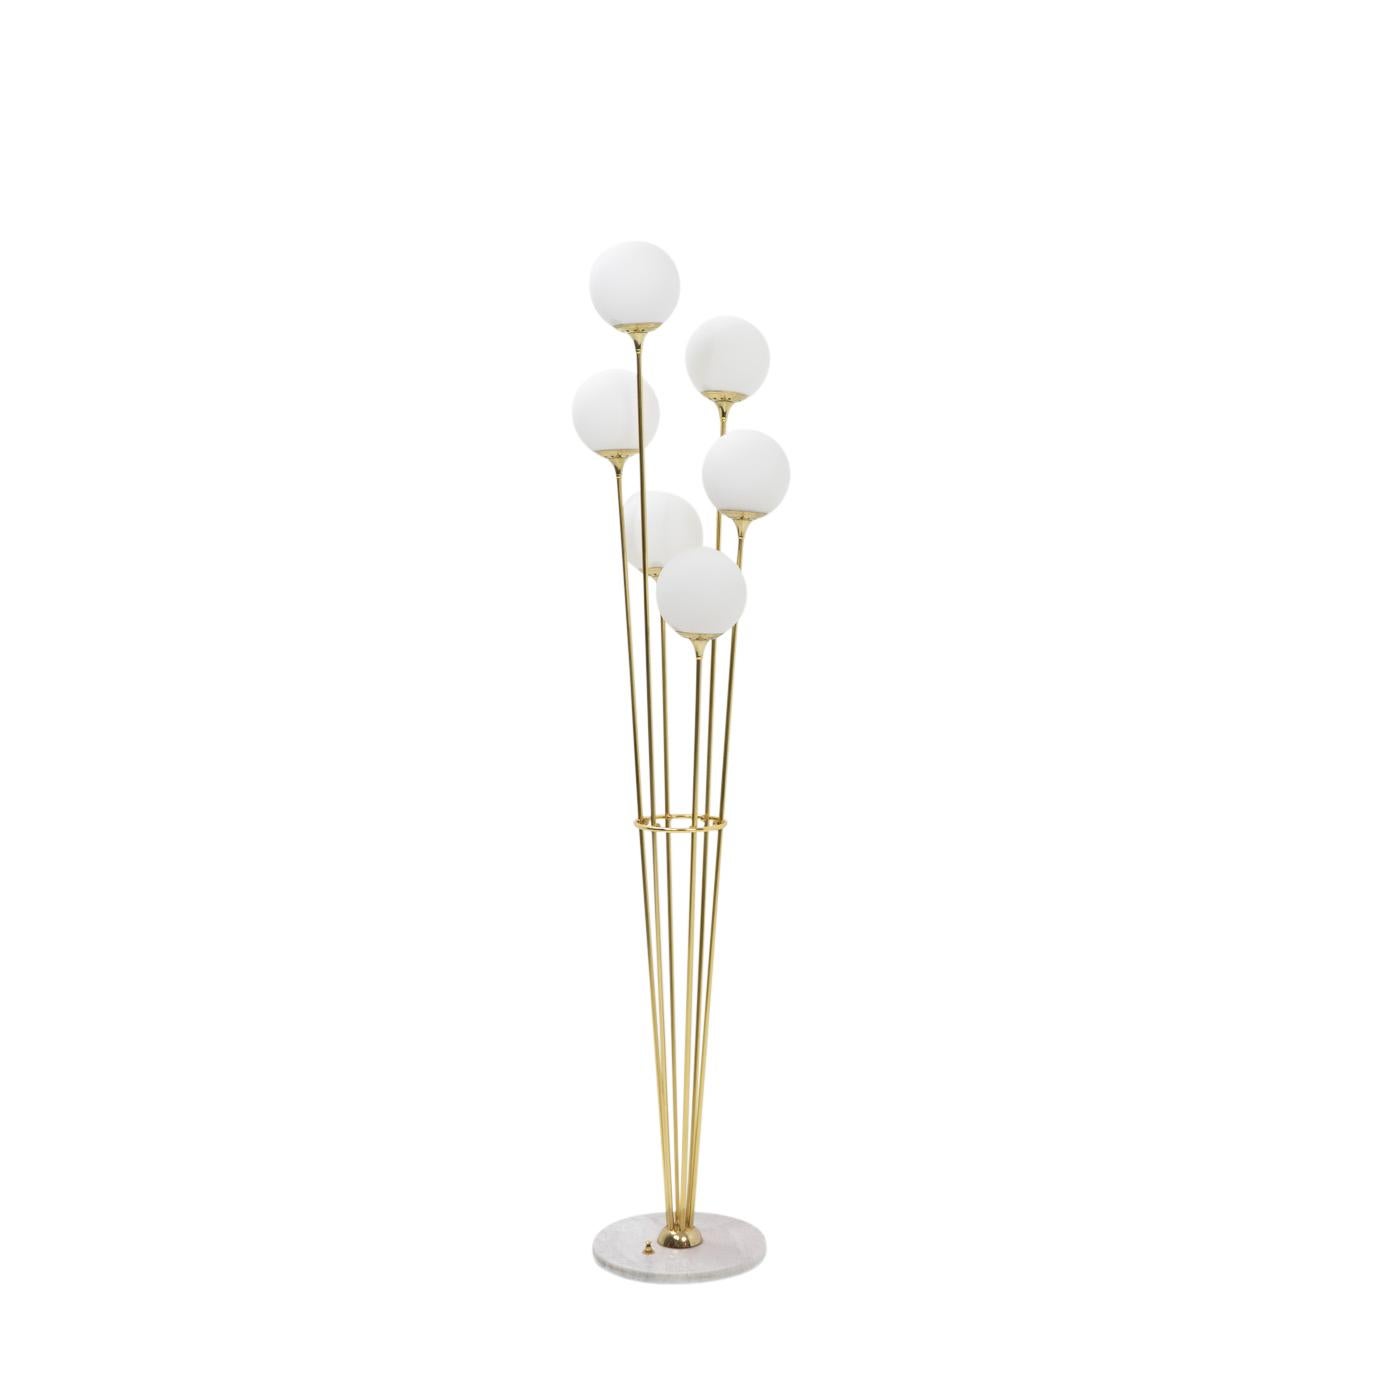 Vintage Italian “Alberello” Floor Lamp, most likely a Stilnovo production from the 1970s.

This highly decorative floor lamp stands on a marble base, and consists of six stems in gilded brass, it is beautiful in appearance and due to its smaller